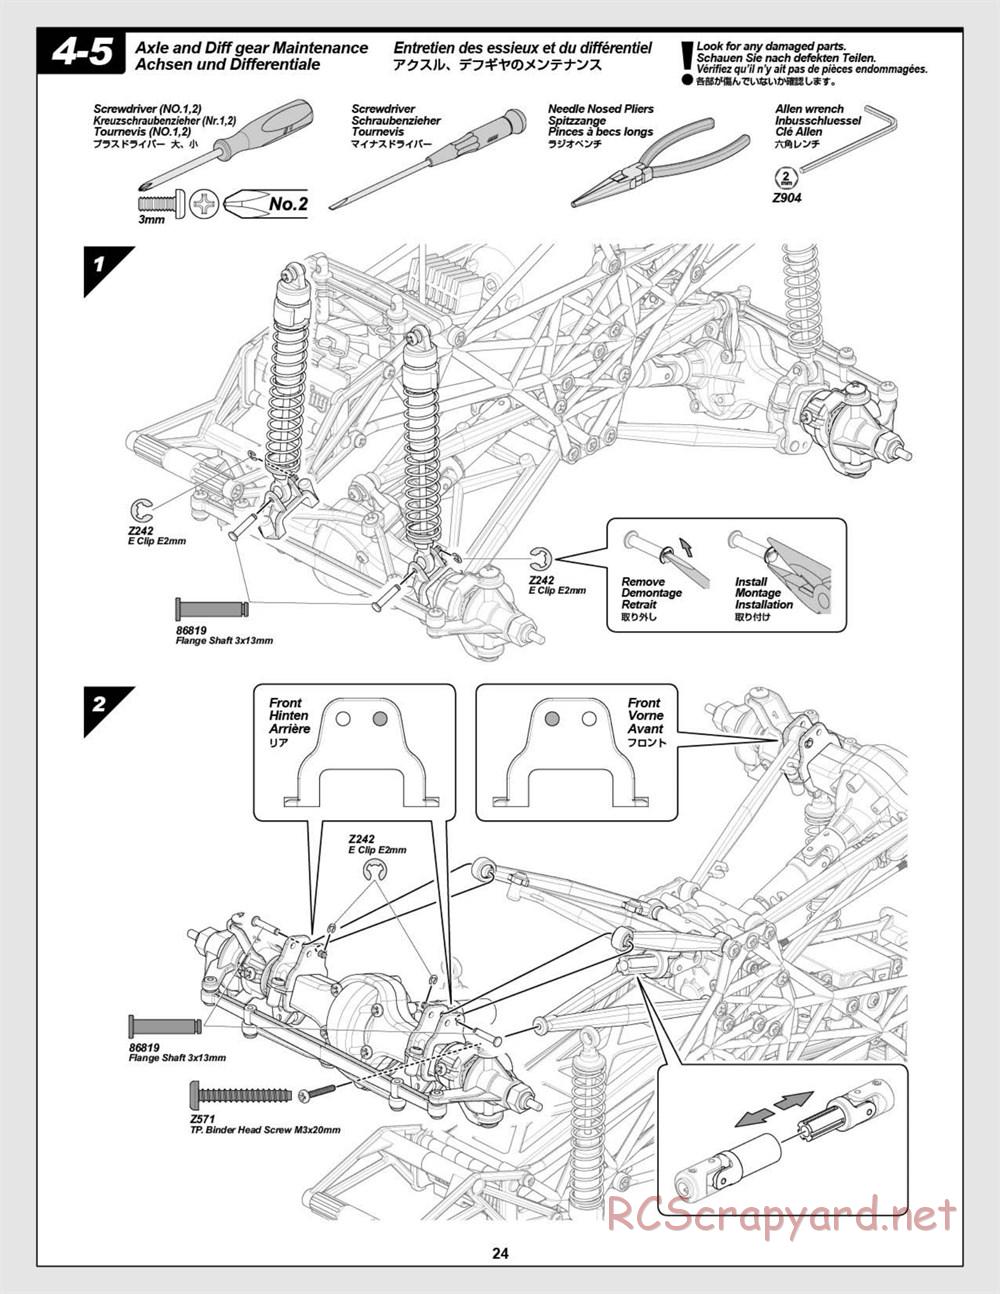 HPI - Wheely King 4x4 - Manual - Page 24